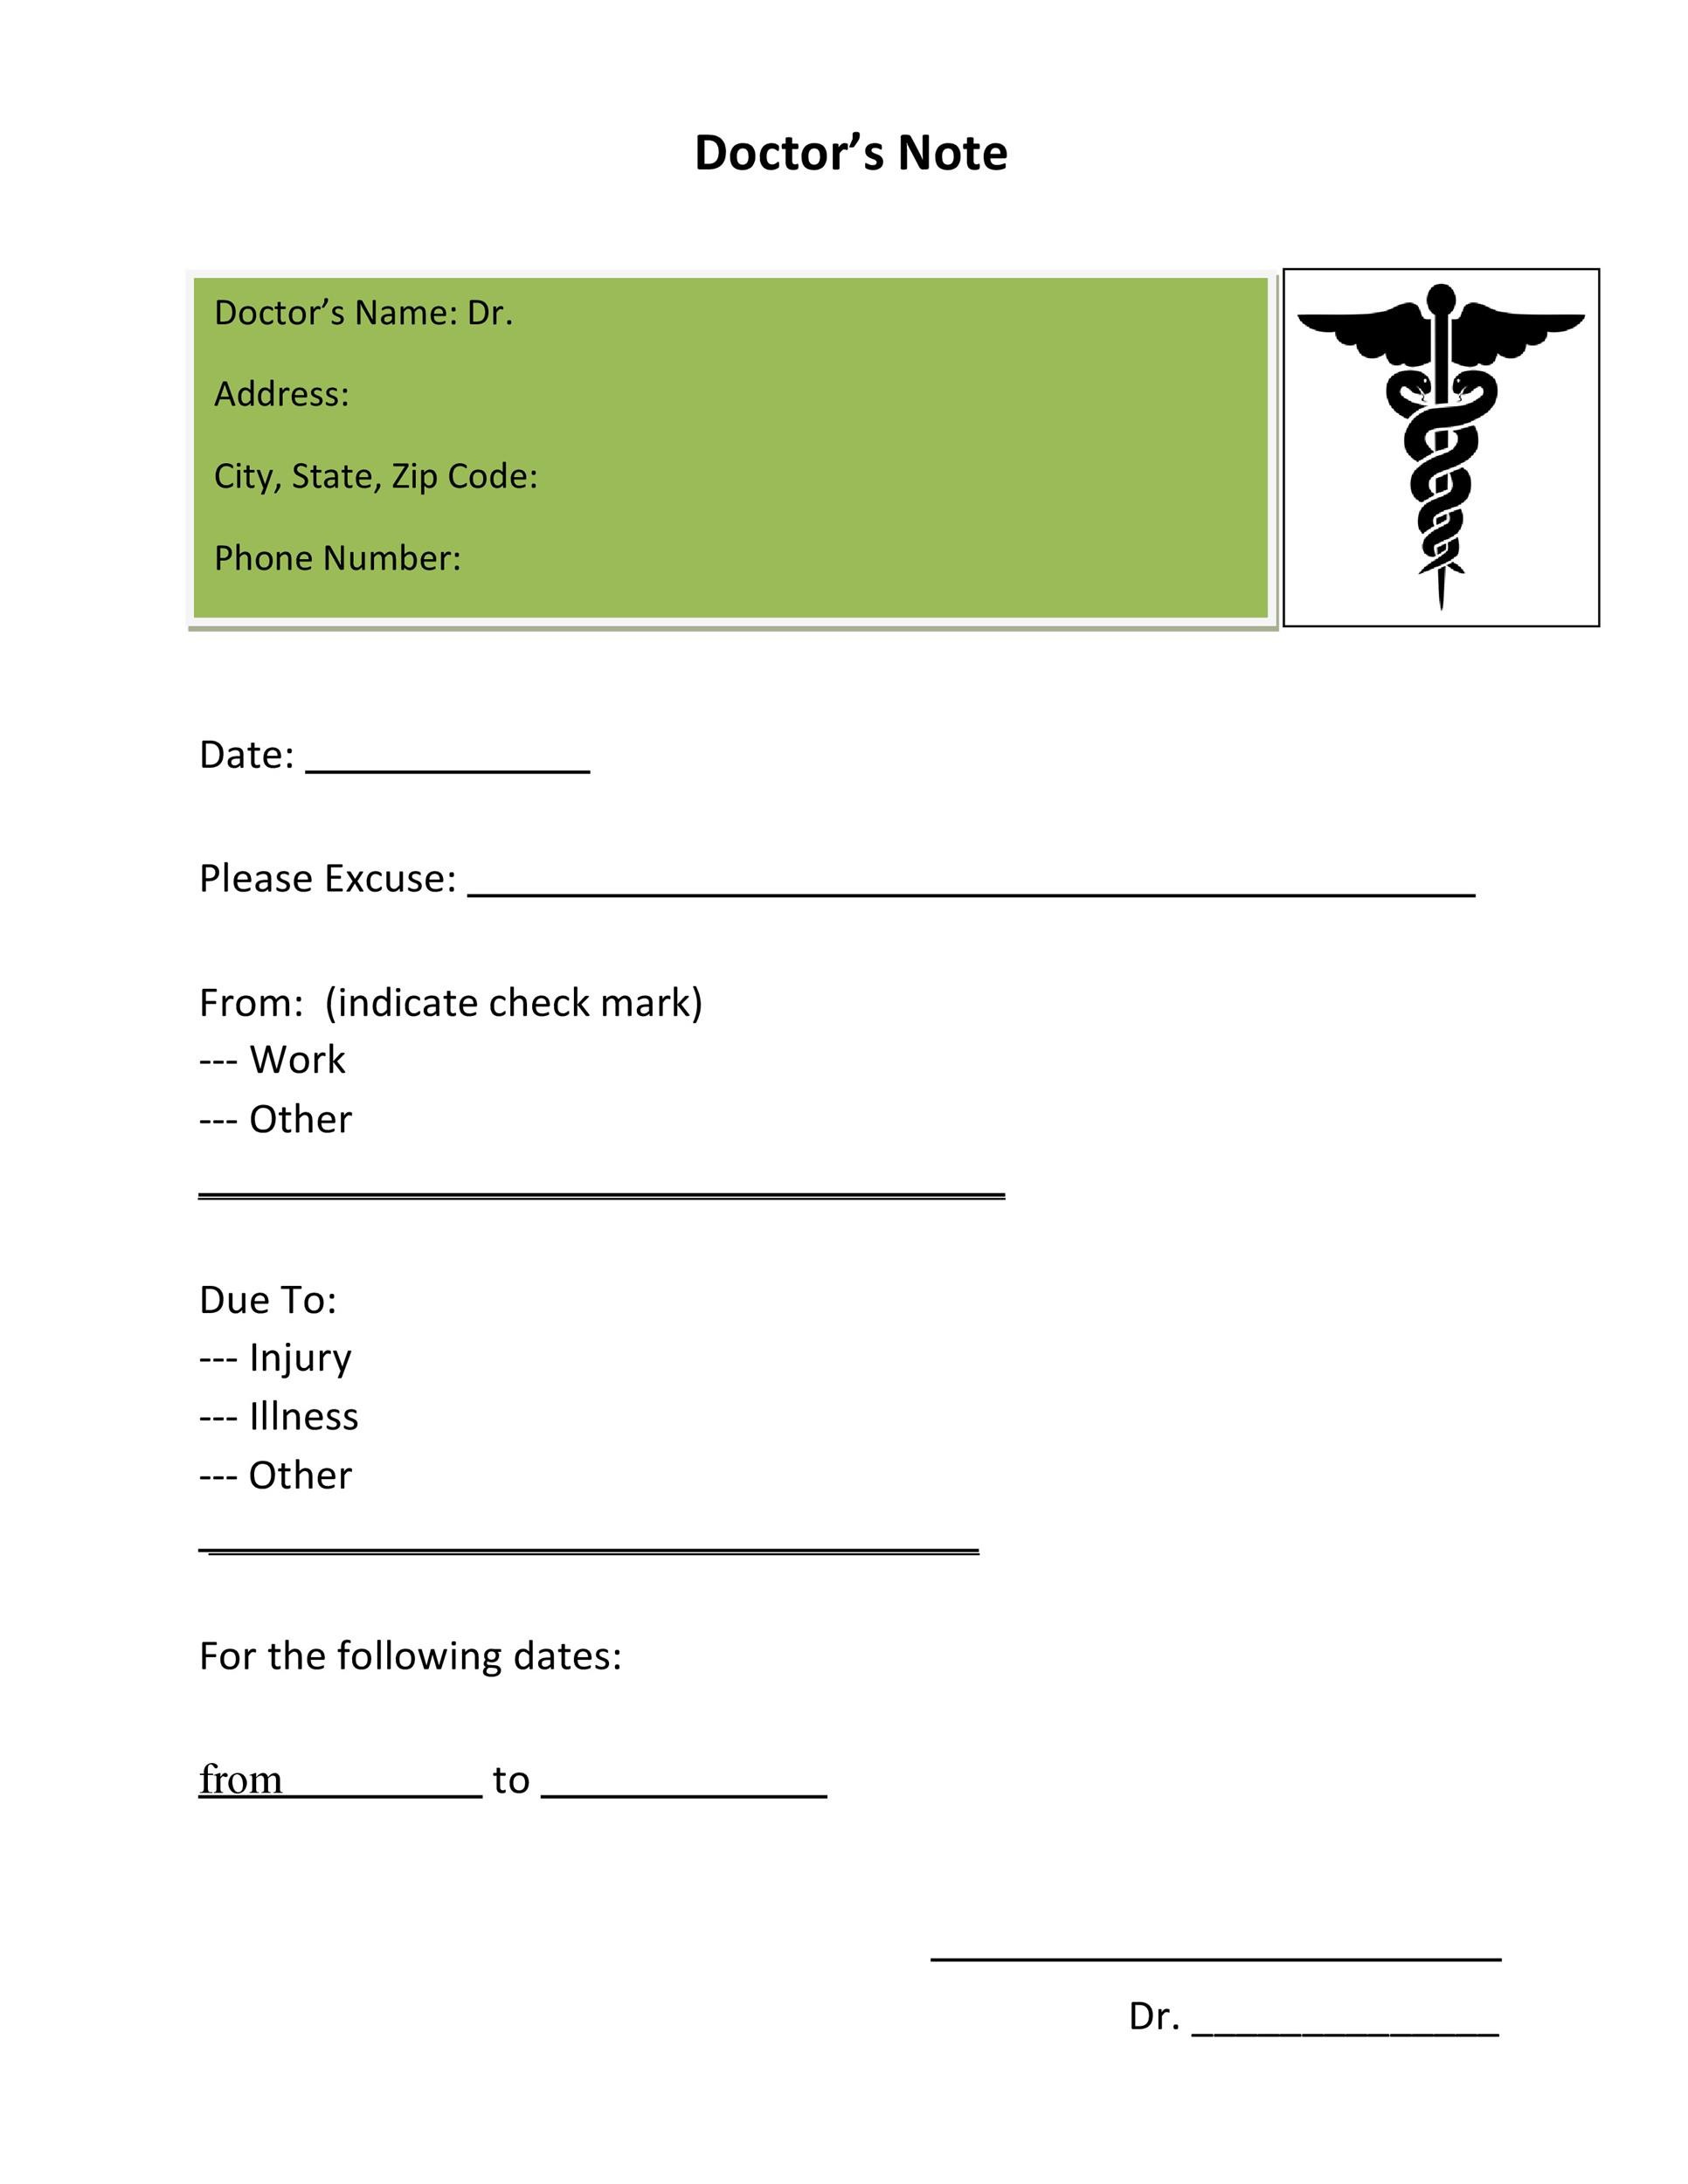 free-printable-doctors-note-for-work-doctors-note-for-work